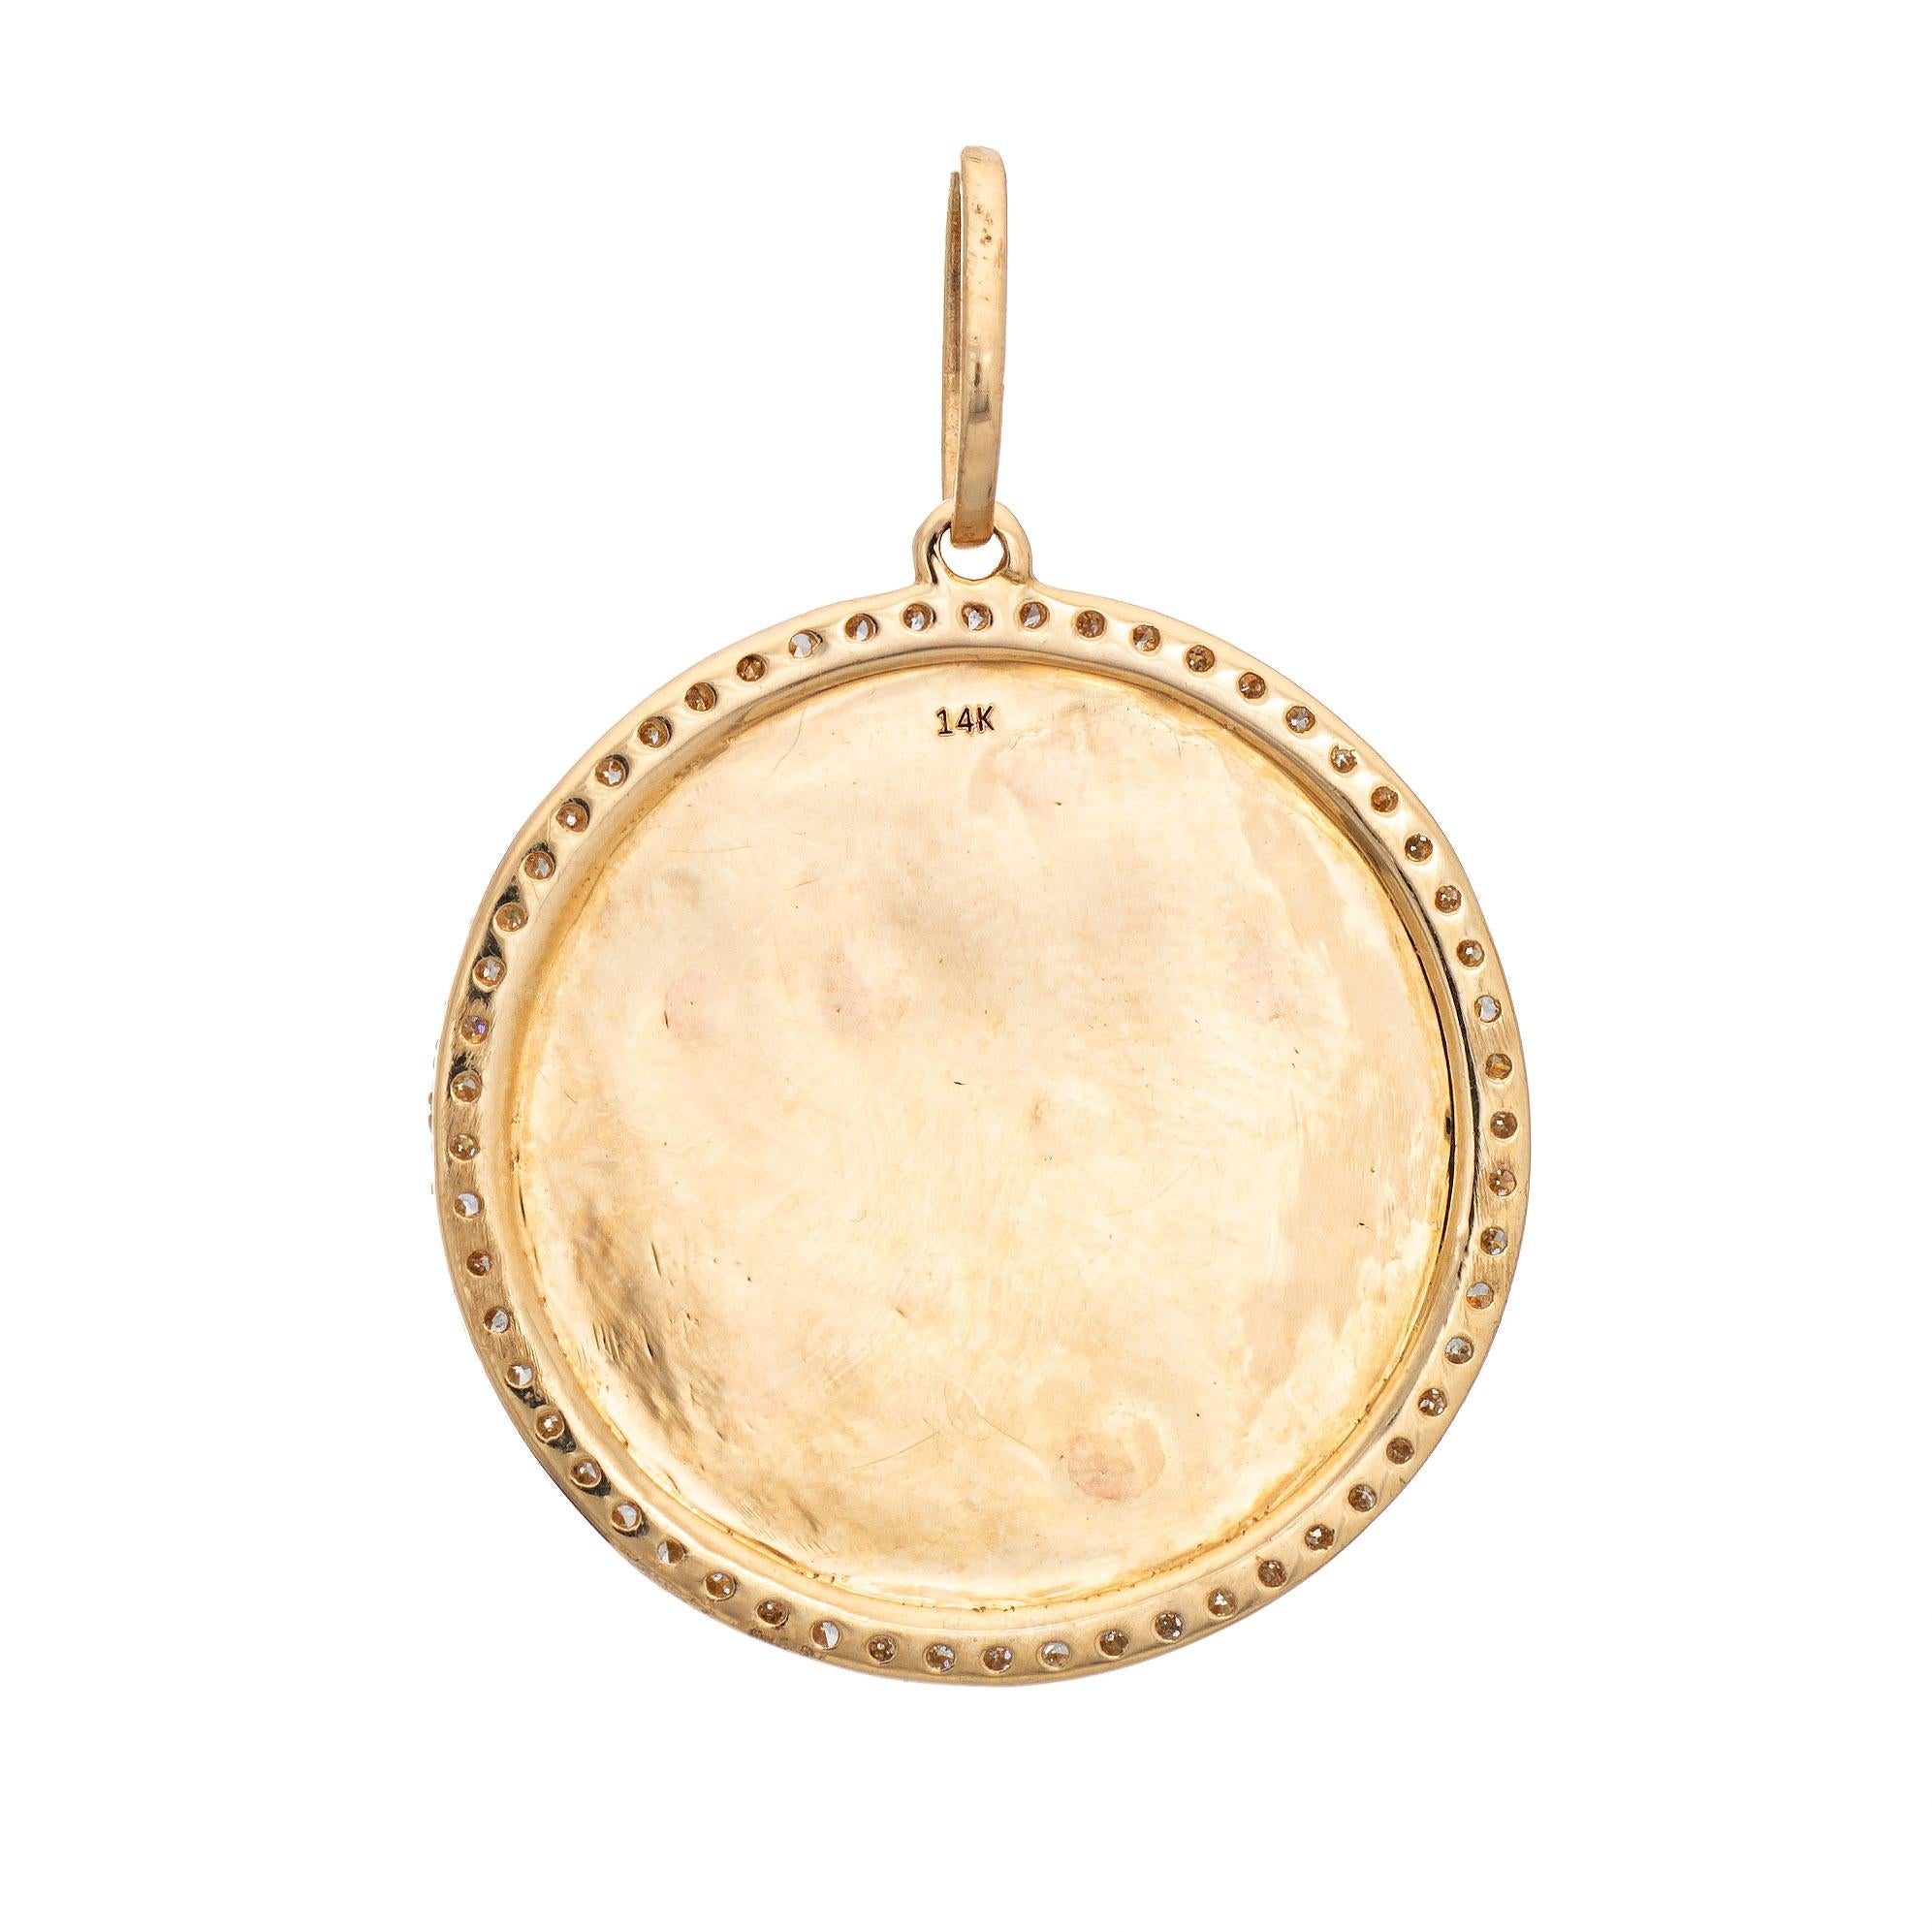 Finely detailed Moon, Star and Saturn celestial diamond pendant crafted in 14k yellow gold.  

Diamonds total an estimated 0.55 carats (estimated at H-I color and VS2-I1 clarity).

The unique charm highlights a celestial galaxy of stars, a crescent